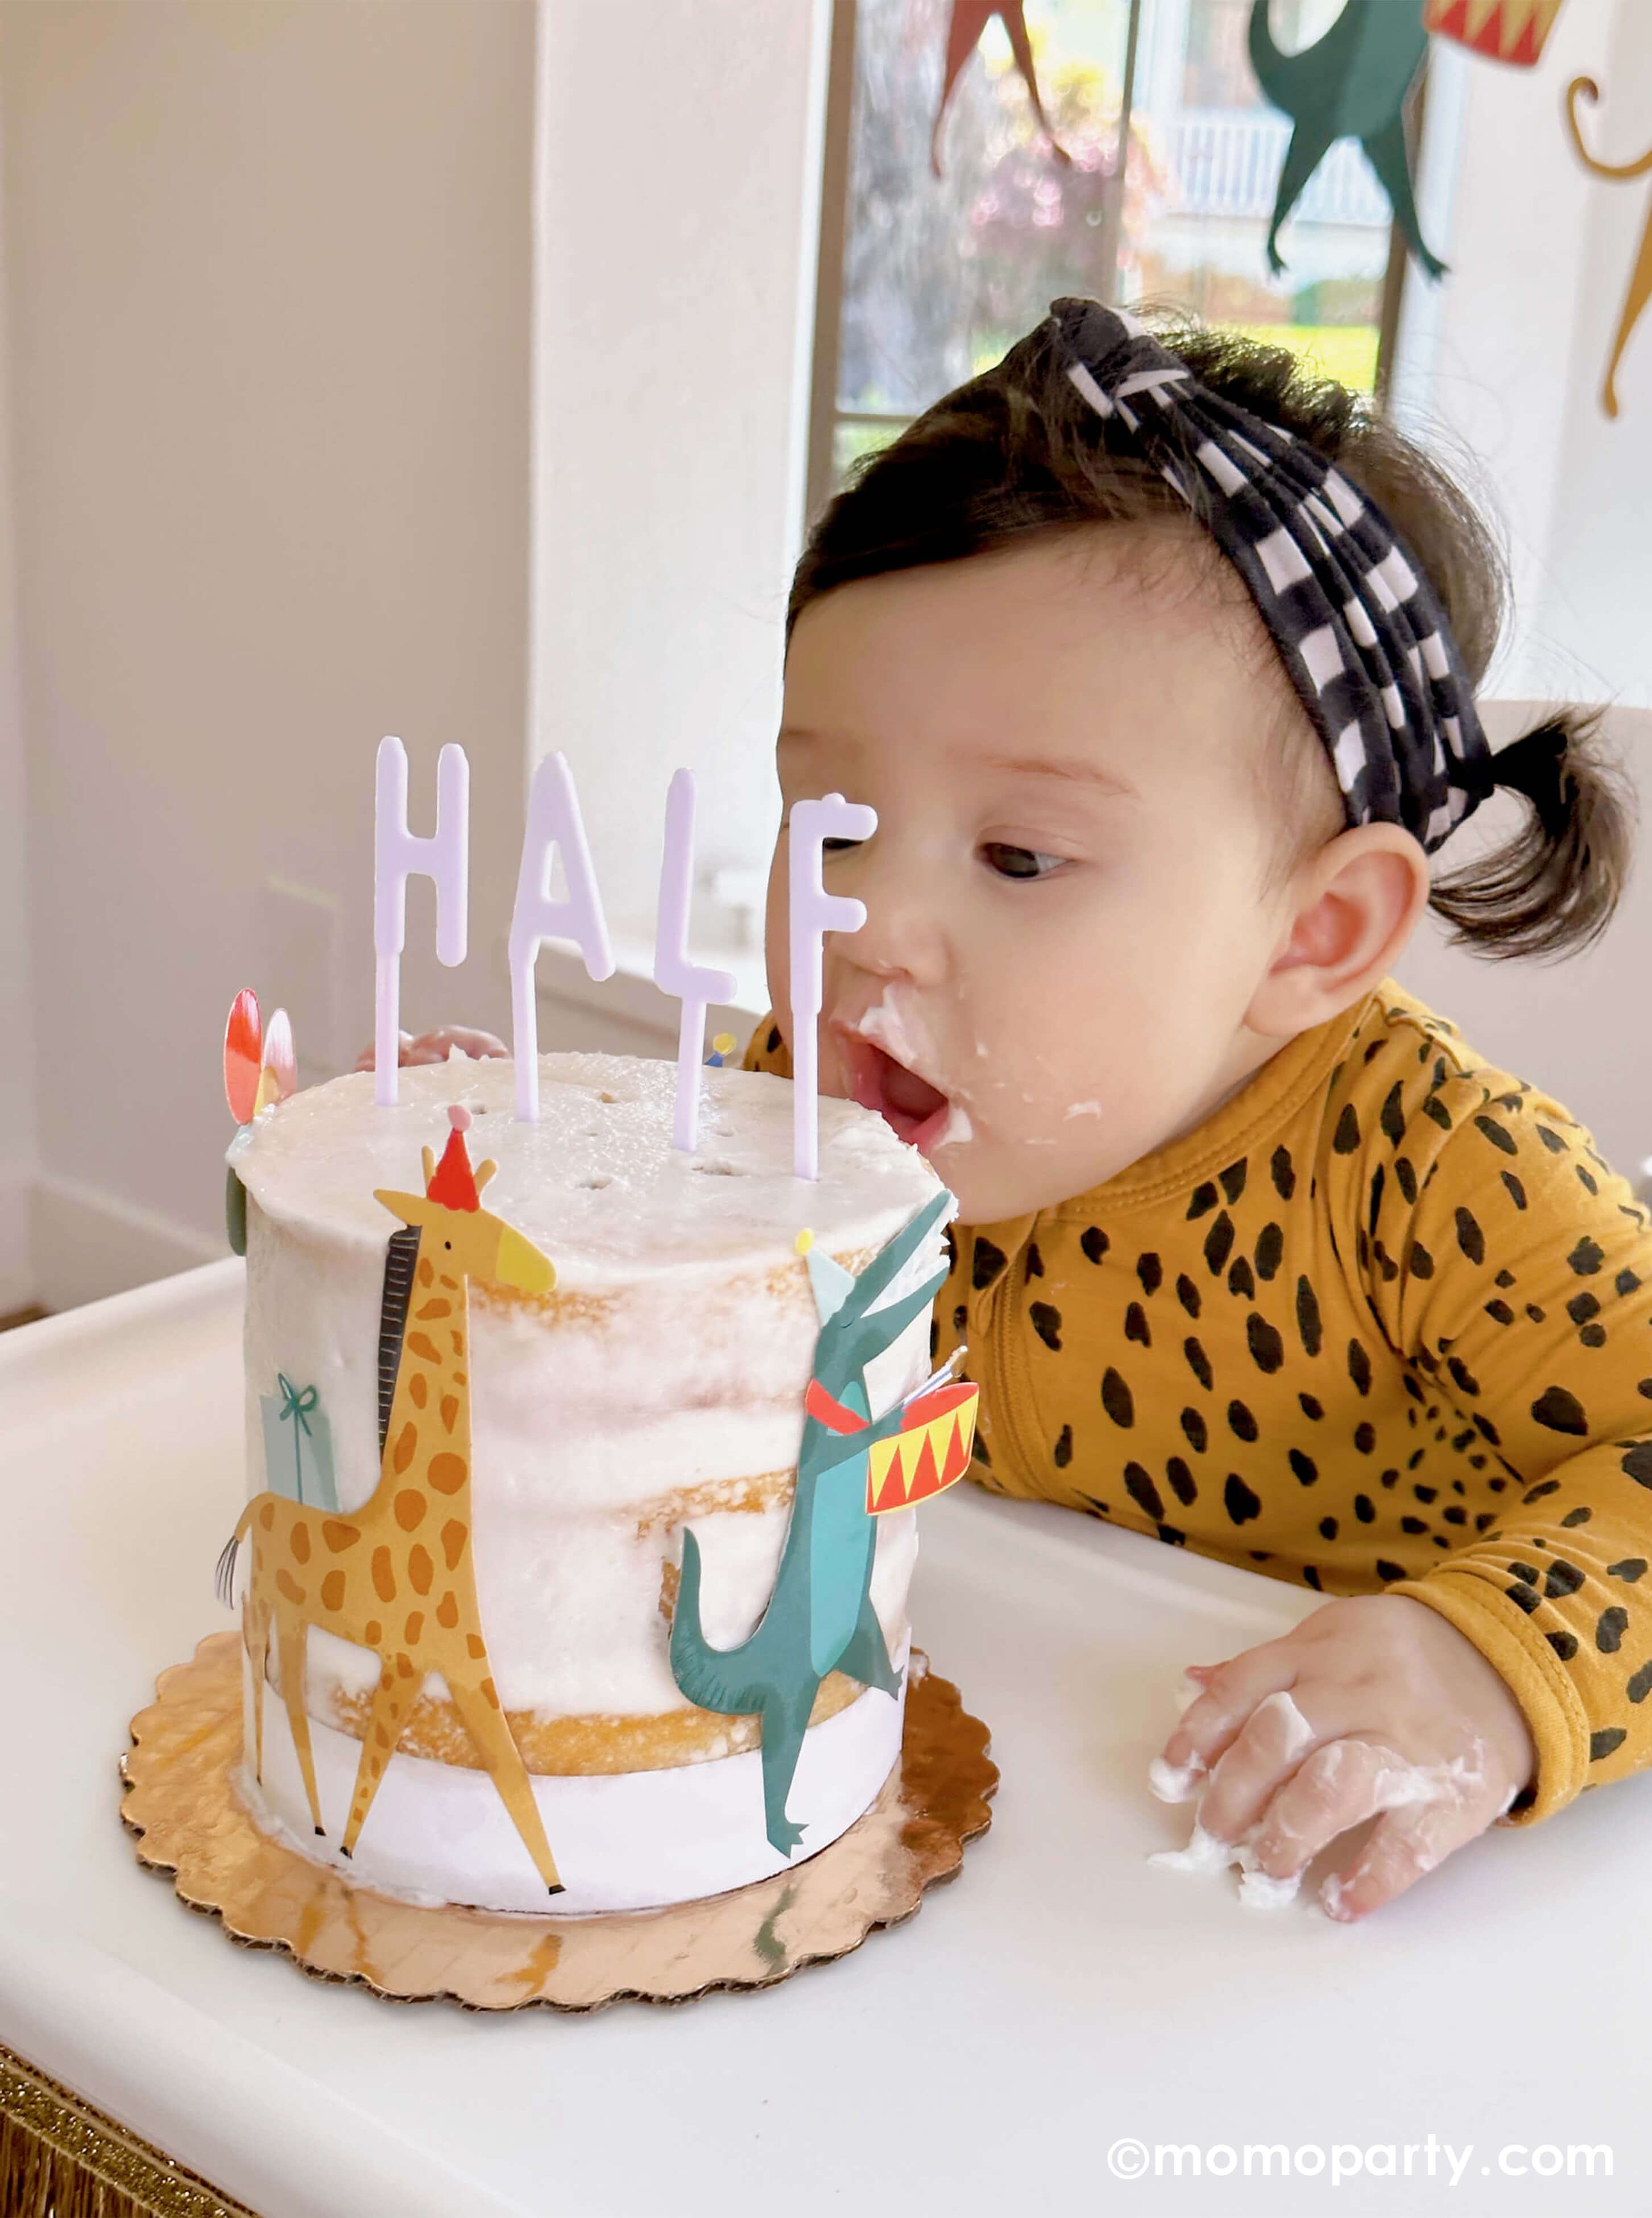 A cute baby girl wearing animal pattern onesie, sitting on a highchair in her 6 months animal themed half birthday party, grabing her Naked Cake decorated with Meri Meri Animal Parade Cake Wrap & Toppers, and on the top spelling "HALF" with Cake By Courtney Letter-board Cake Toppers, repersend for a six months half birthday, along with Meri Meri gold fringe garland around the highchair tray, it makes a great party inspiration for kid's animal, safari, carnival themed birthday party.